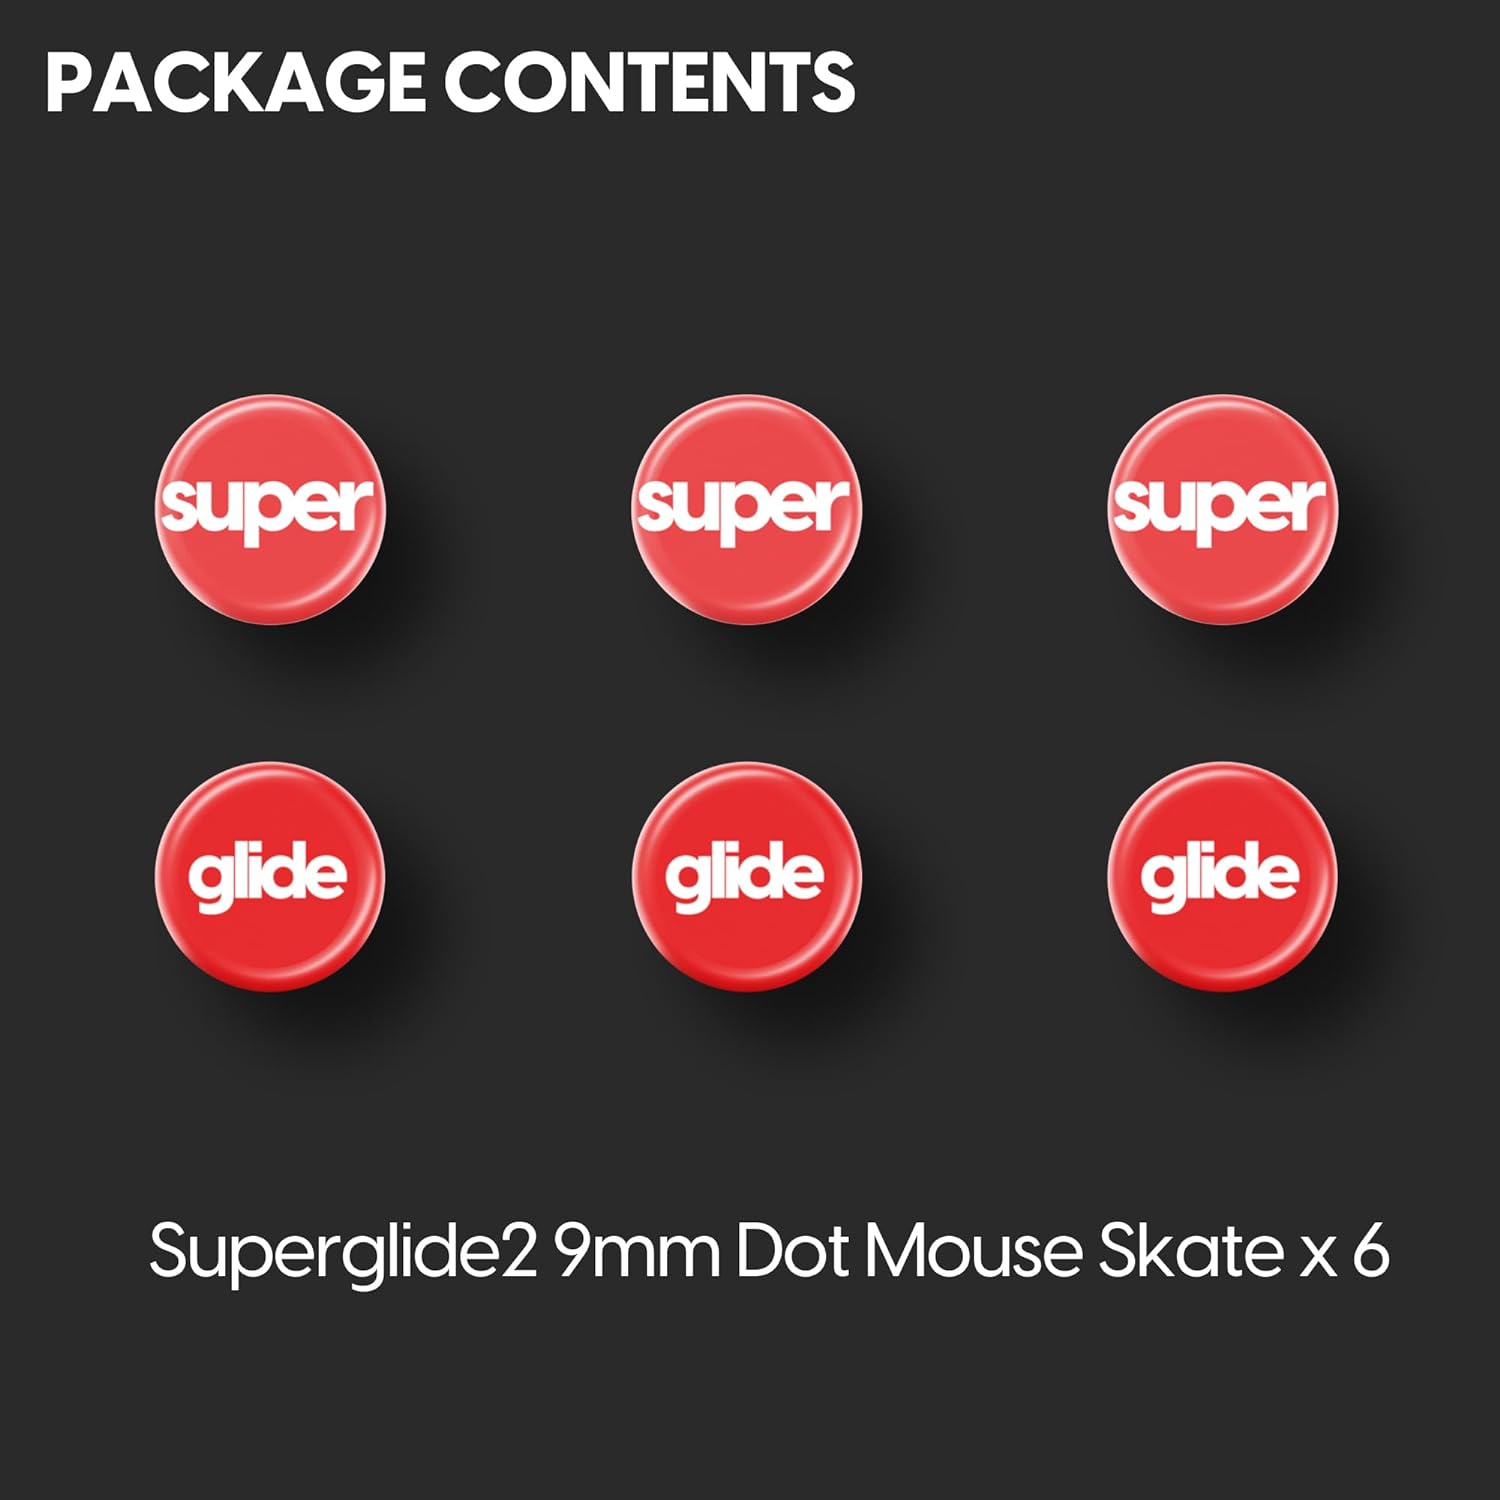 A large marketing image providing additional information about the product Pulsar Superglide 2 Dot Skates for Universal 9mm x 6 - Red - Additional alt info not provided